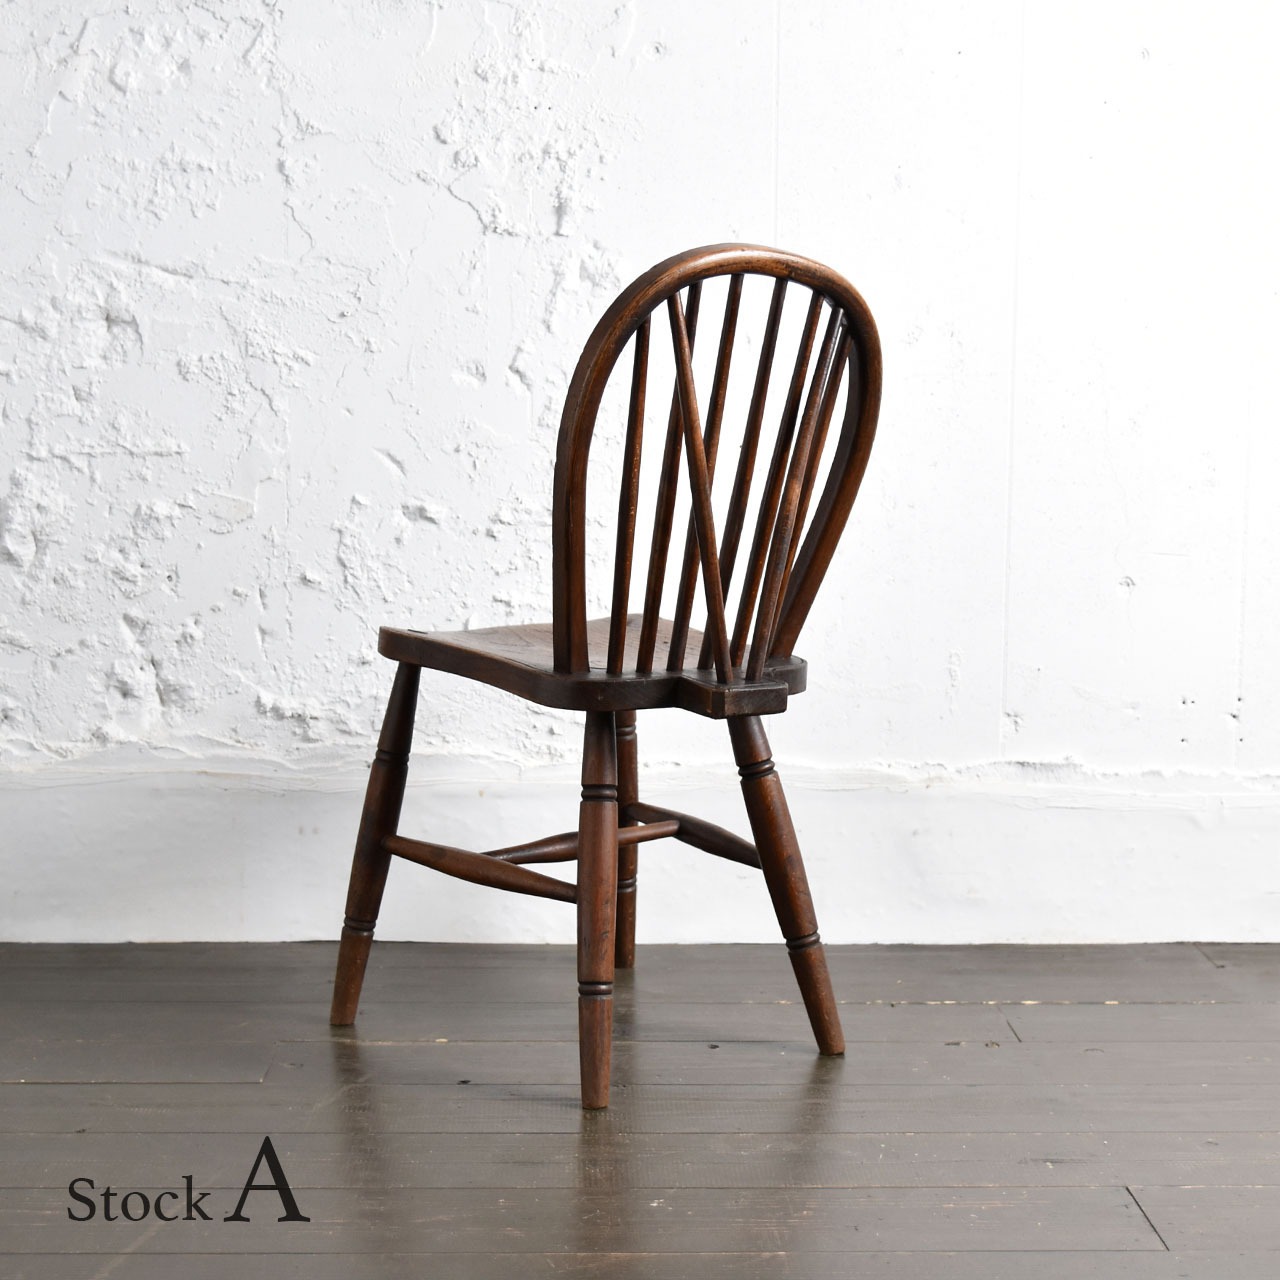 Kitchen Chair (Hoop back)【A】 / キッチンチェア (フープバック) / 1806-0118A